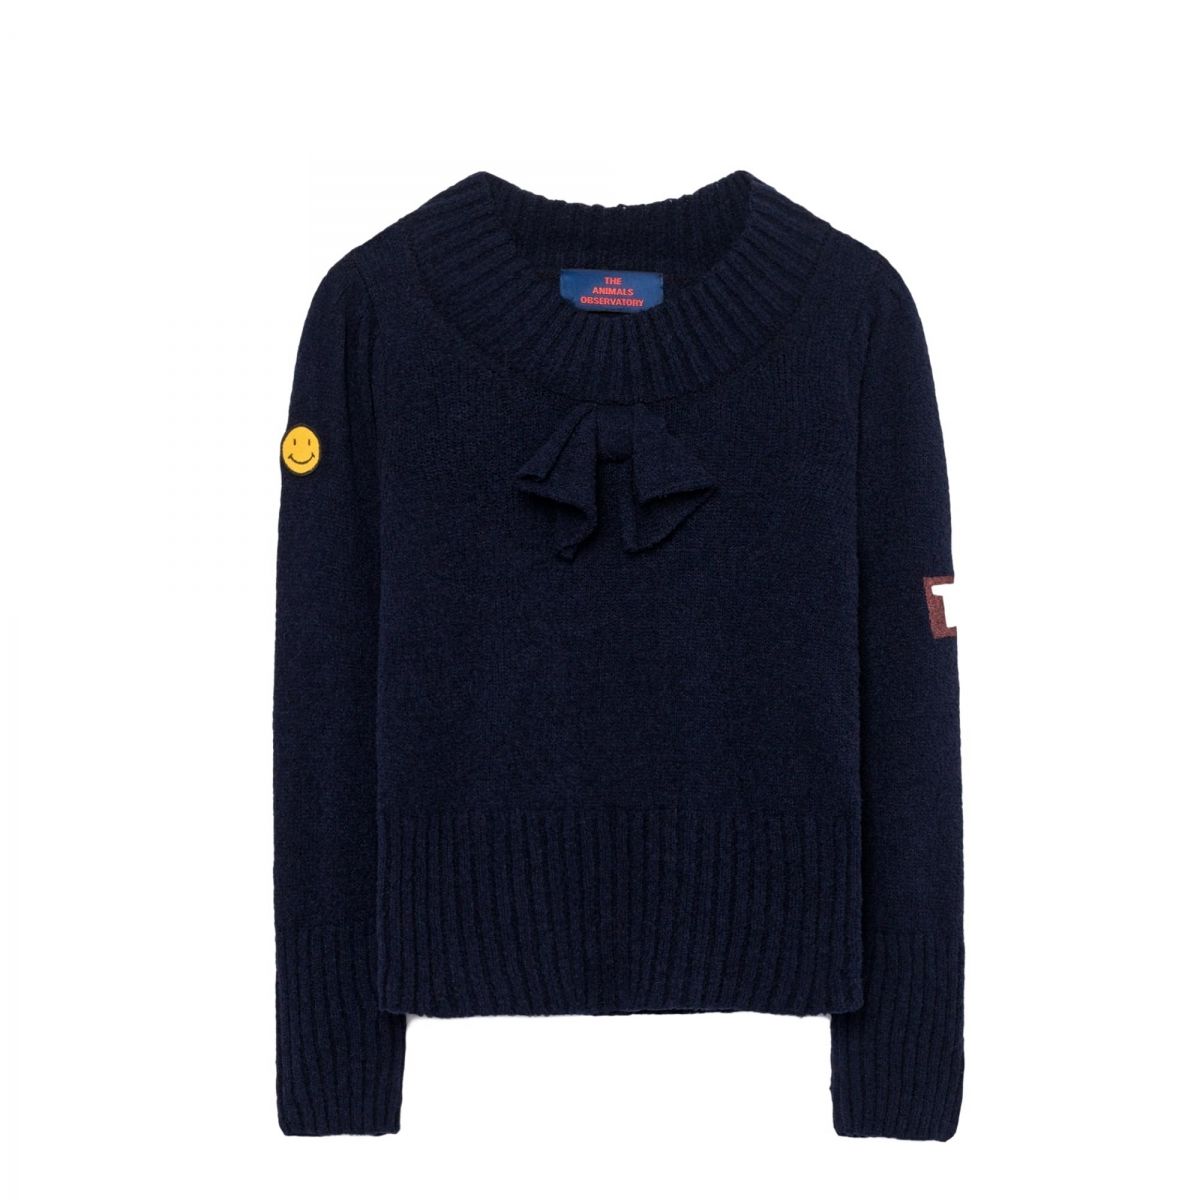 The Animals Observatory Horsefly Kids Sweater blue 000945 064_KG